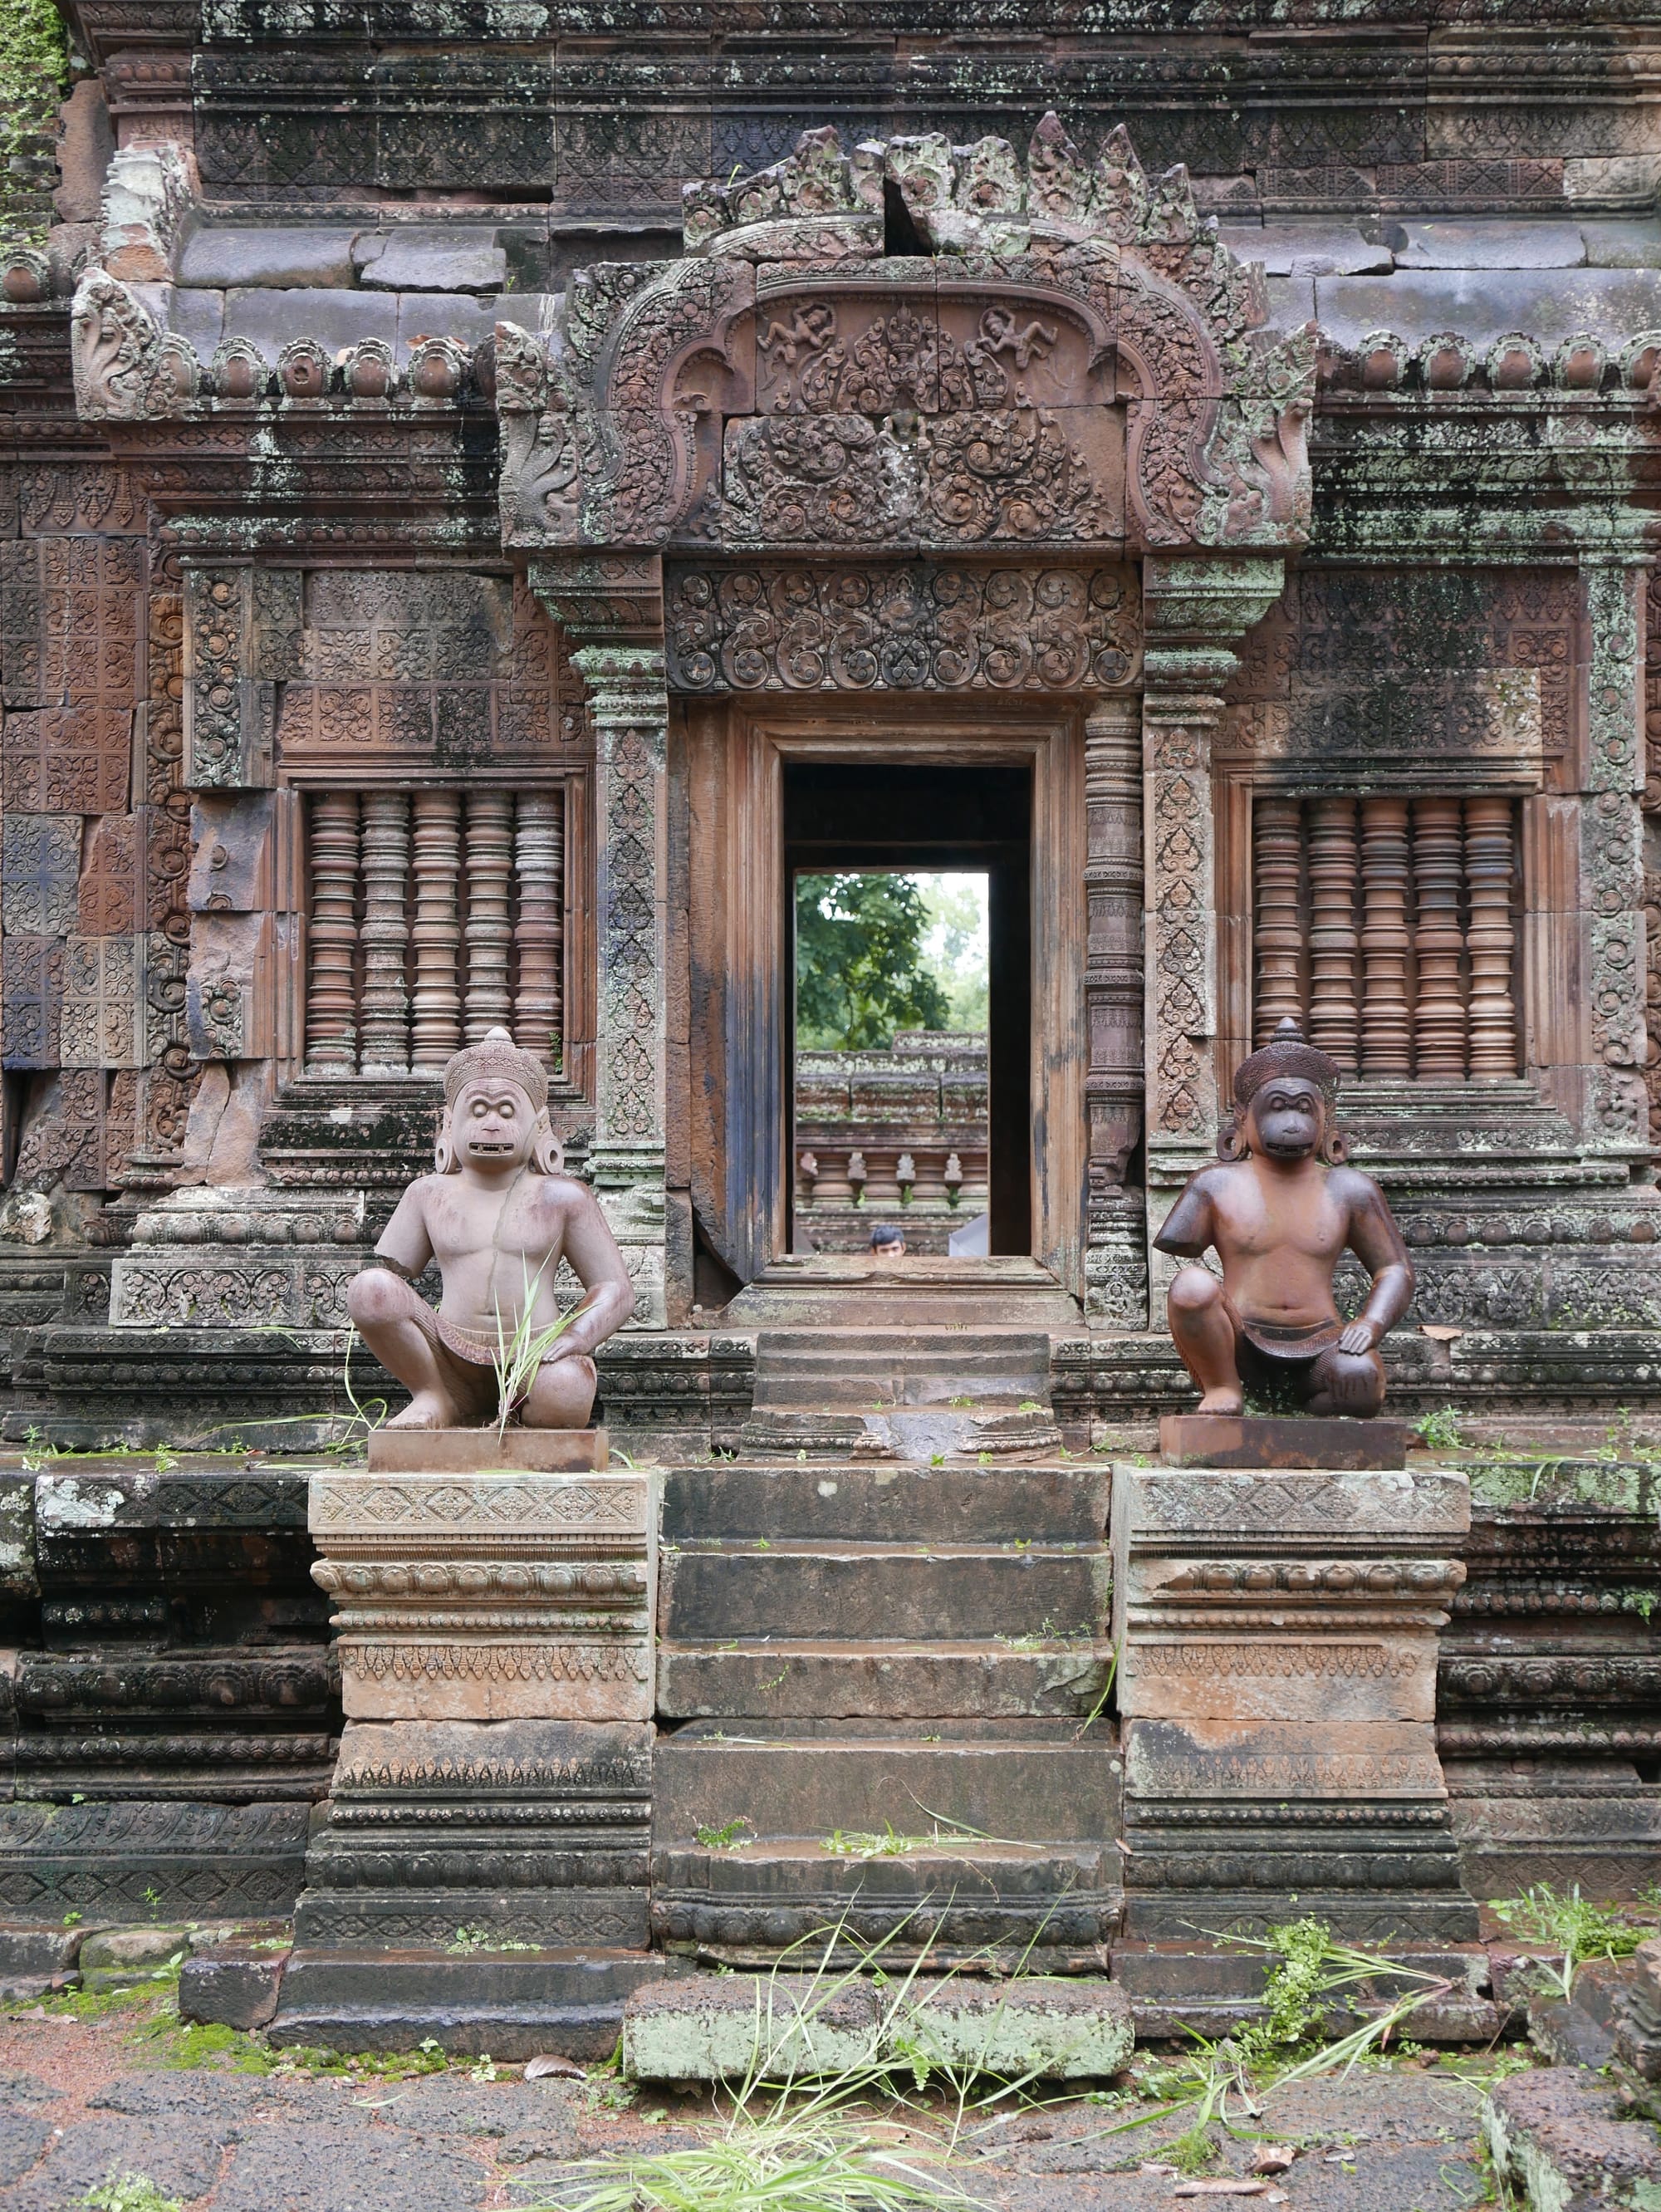 Photo by Author — Banteay Srei Temple (ប្រាសាទបន្ទាយស្រី), Angkor Archaeological Park, Angkor, Cambodia